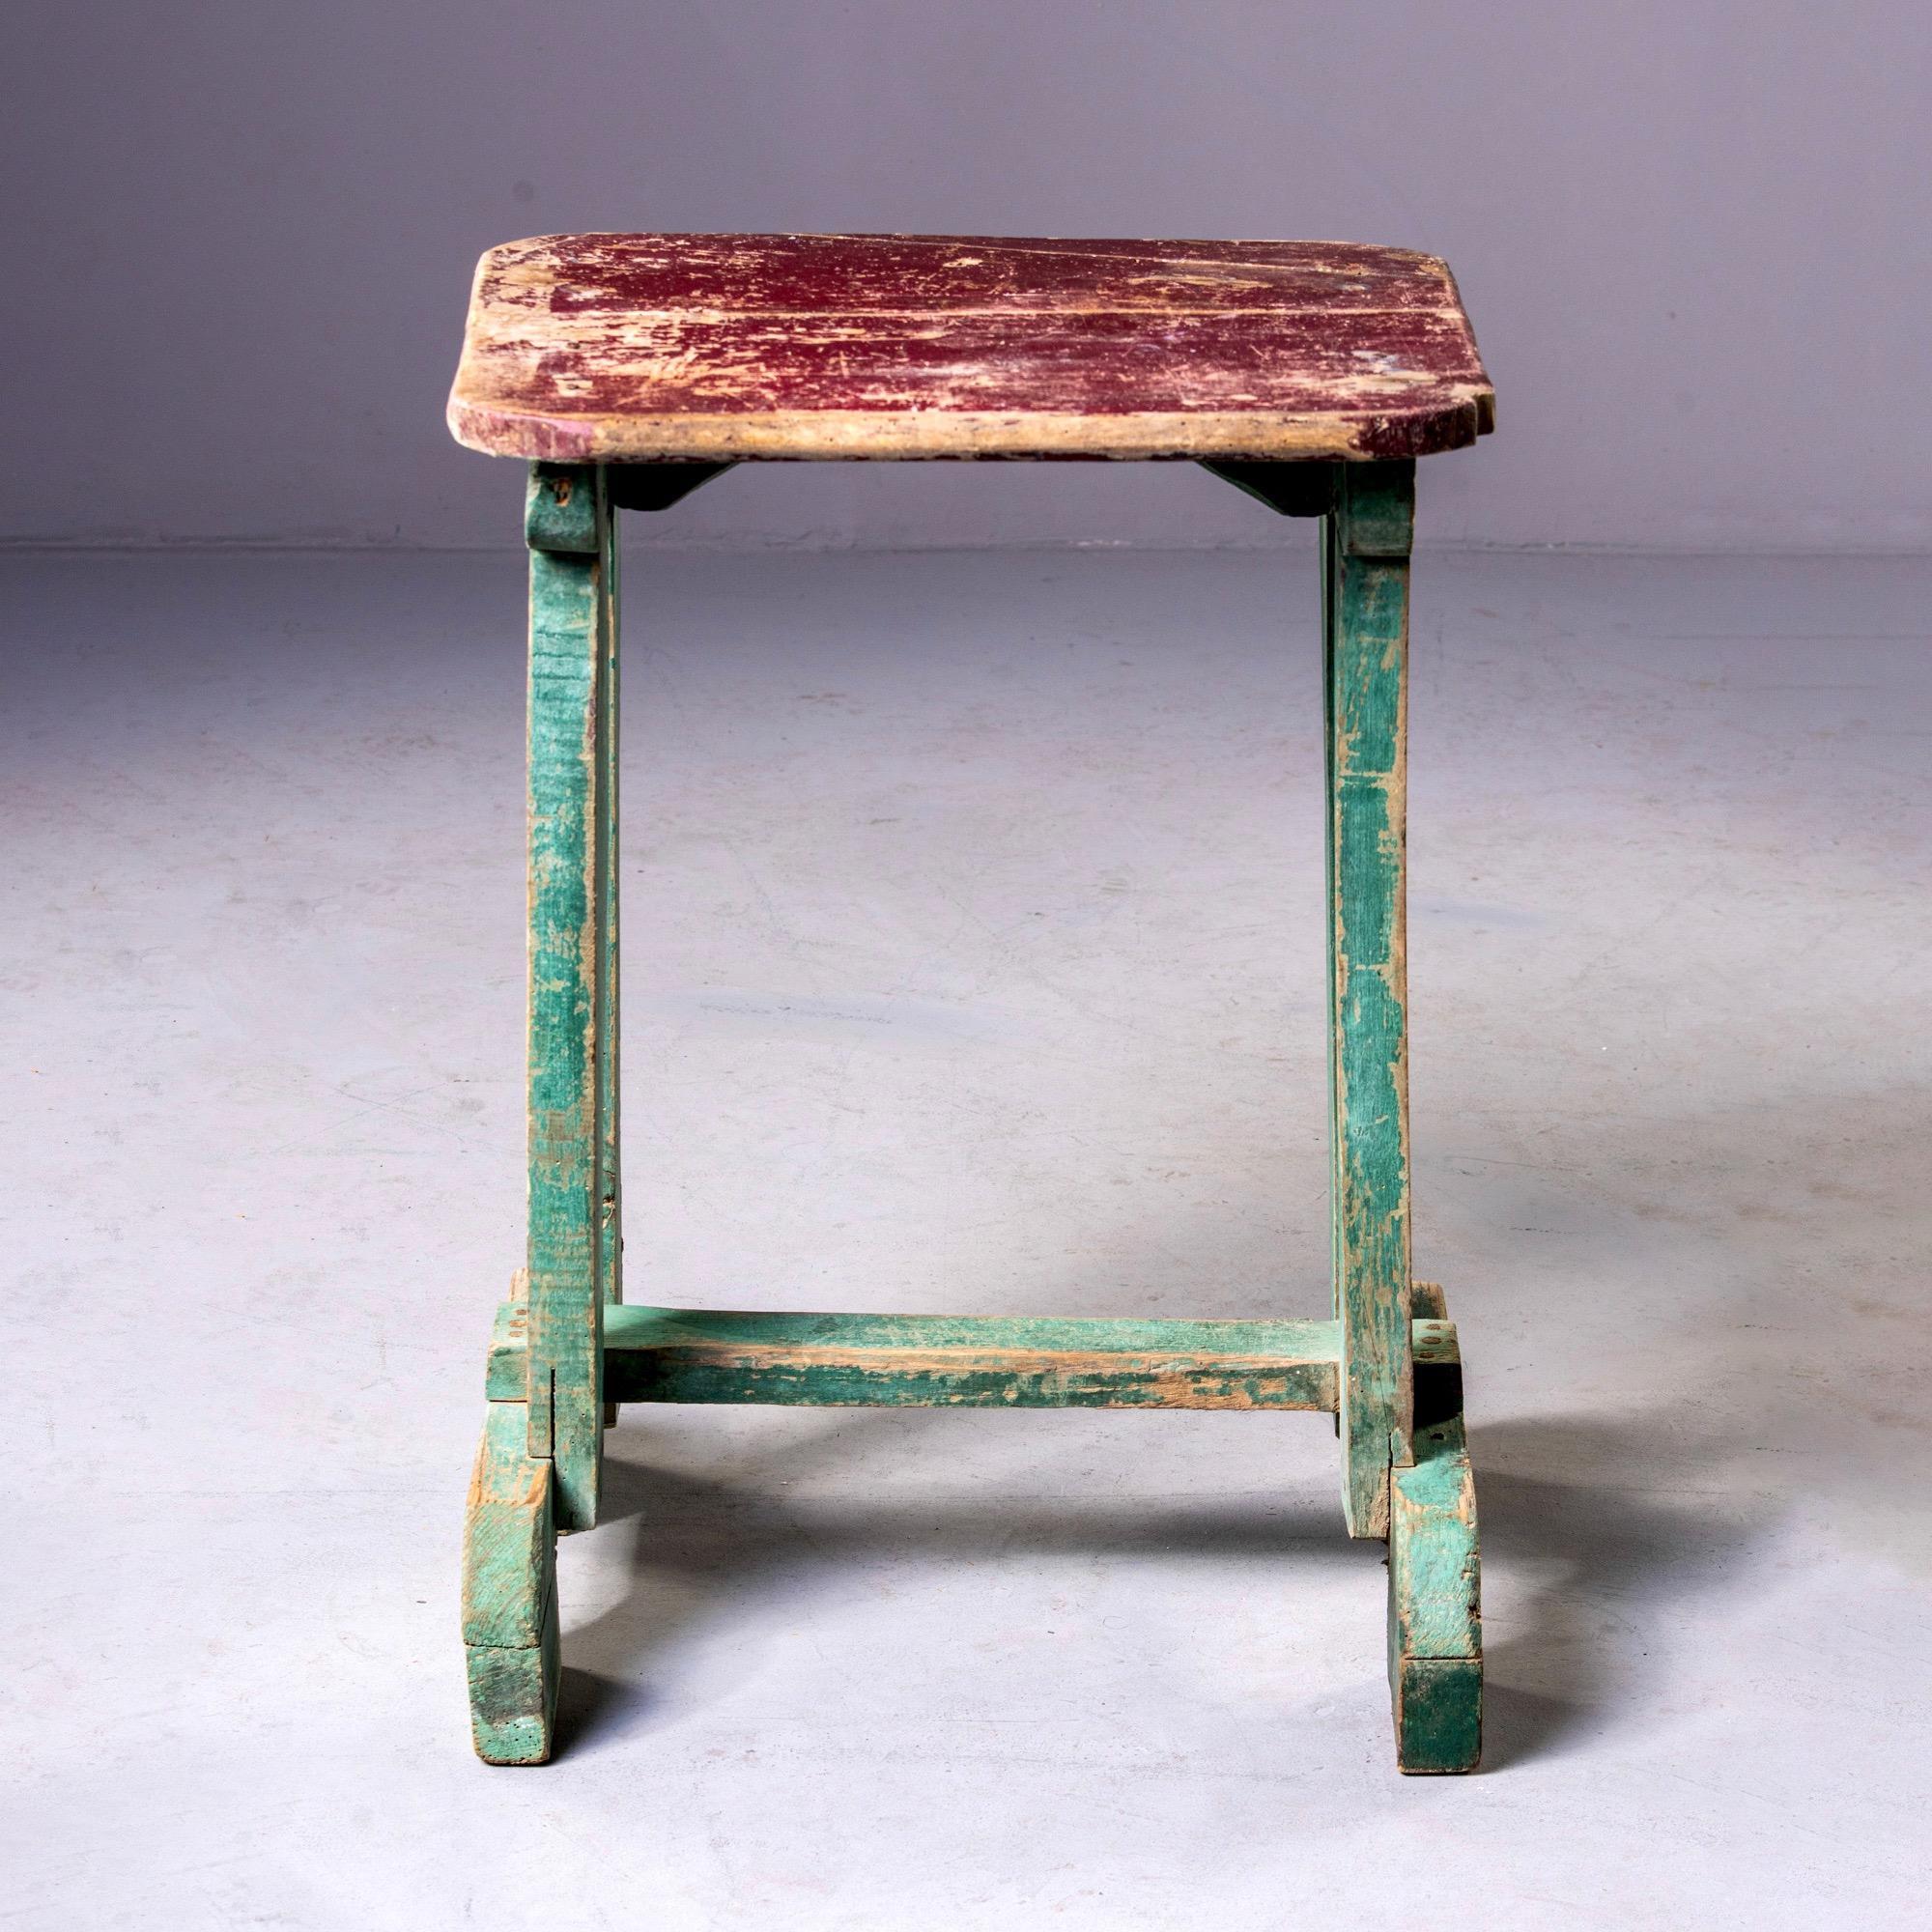 Painted wood side table found in England, circa 1900s. Original red paint on table top and green paint on base. Unknown maker.